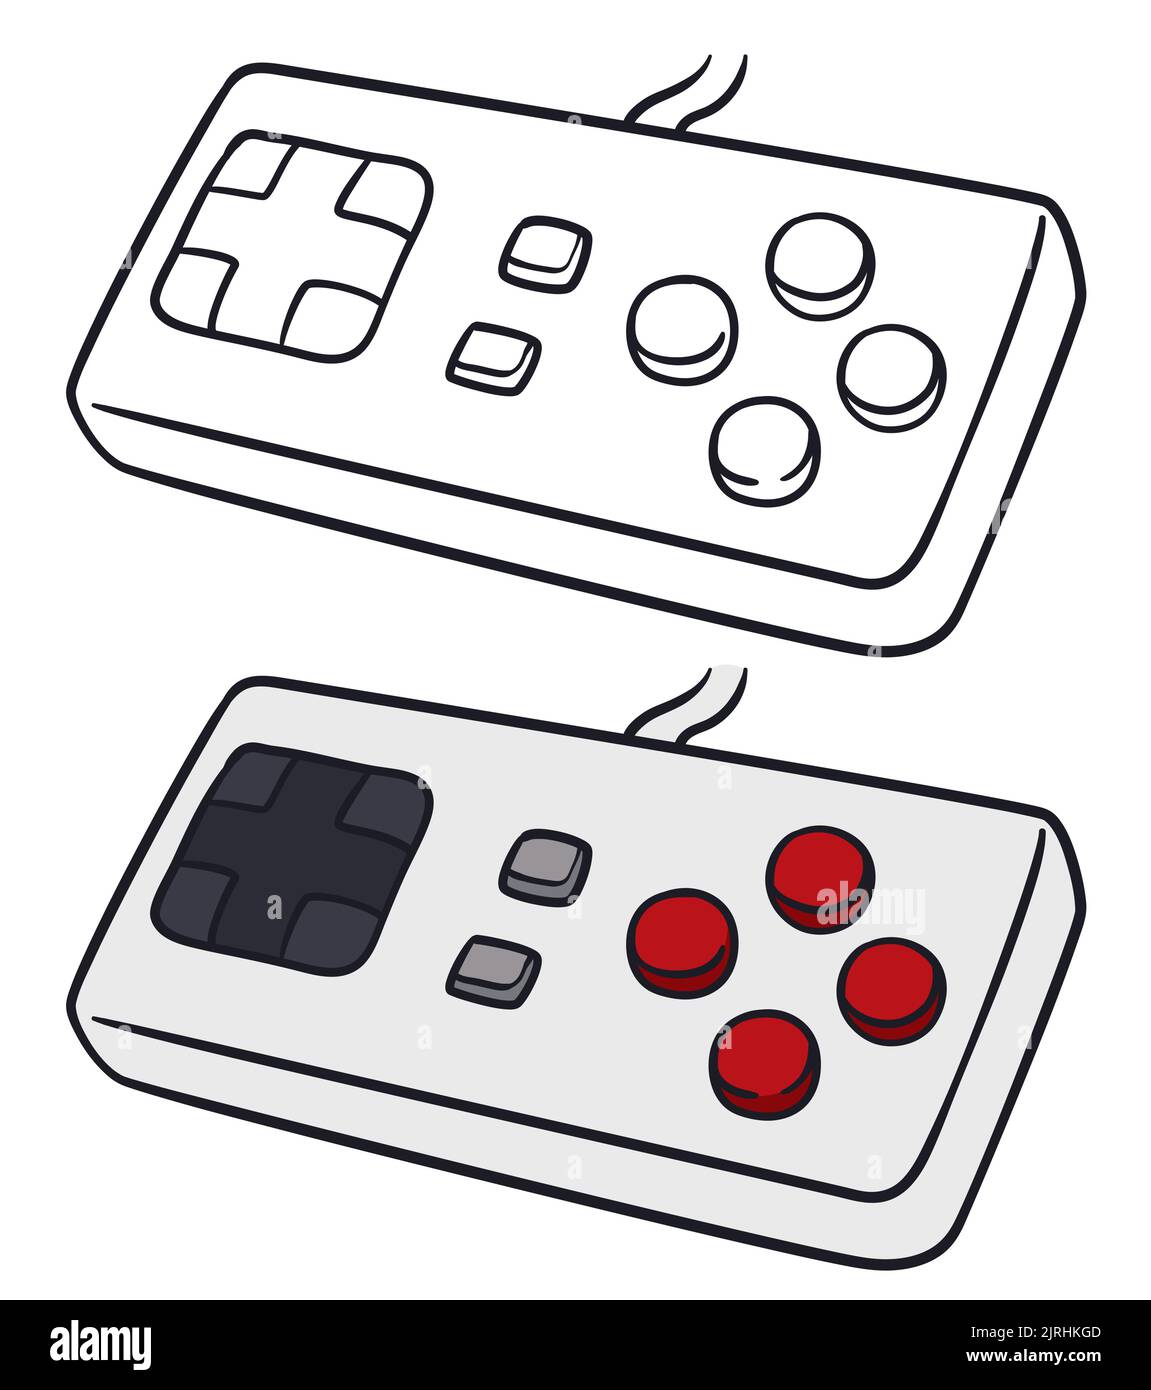 Old videogame controllers, one colorless in outline style and other in flat colors with buttons and D-pad. Stock Vector